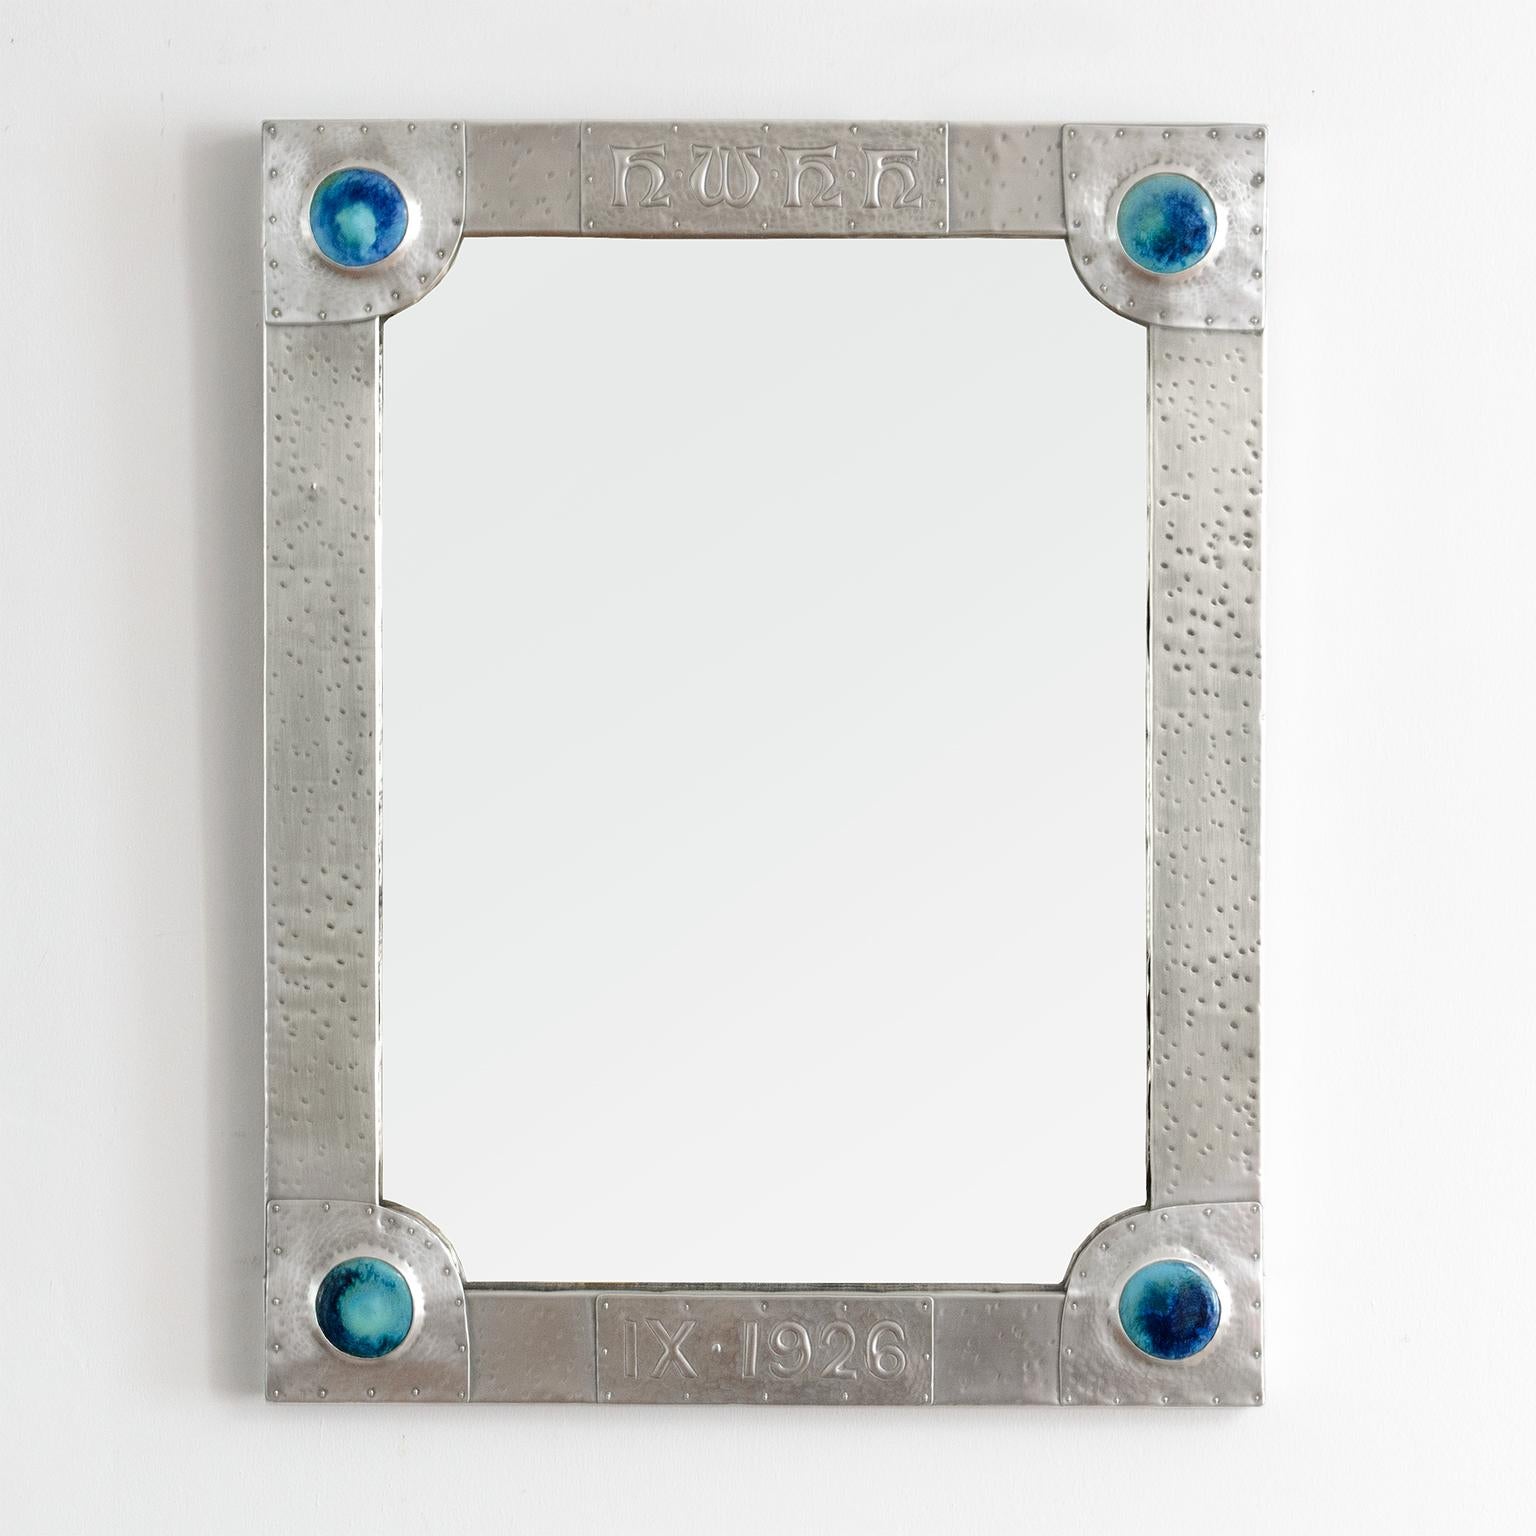 An Arts & Crafts era polished pewter mirror detailed with enameled 